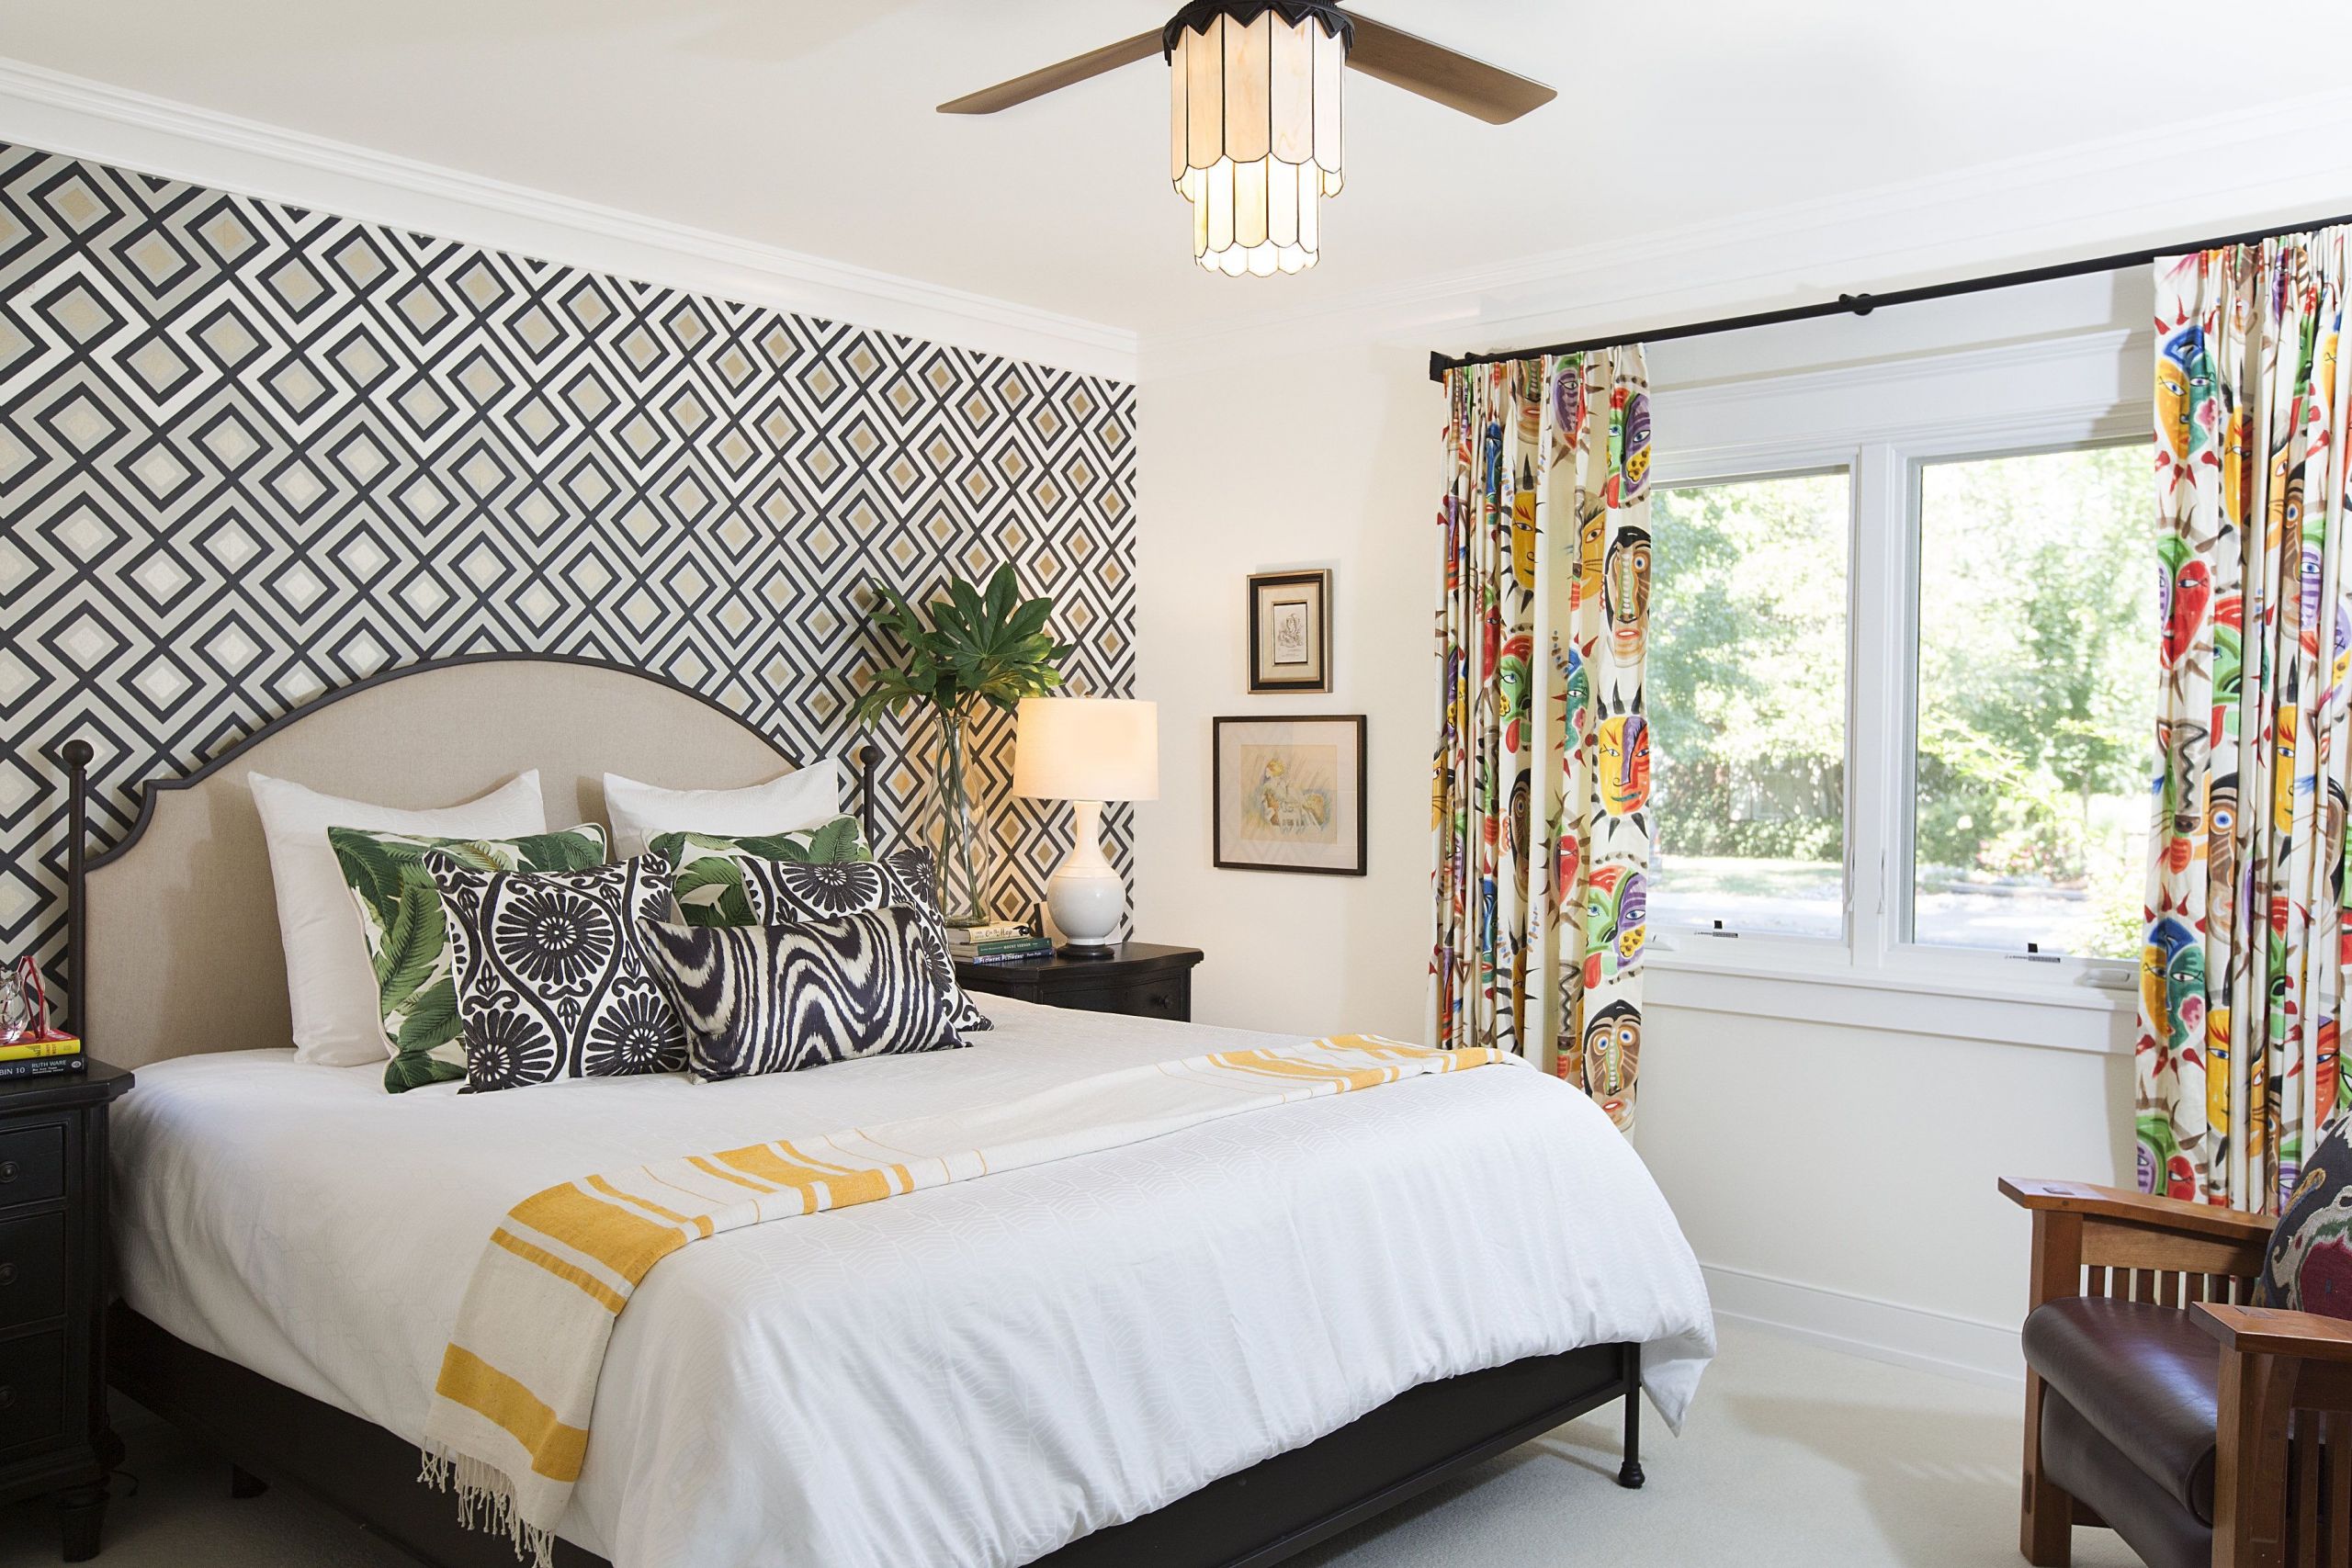 Master Bedroom Wallpaper Accent Wall
 Accent wall with geometric wallpaper and colorful drapery